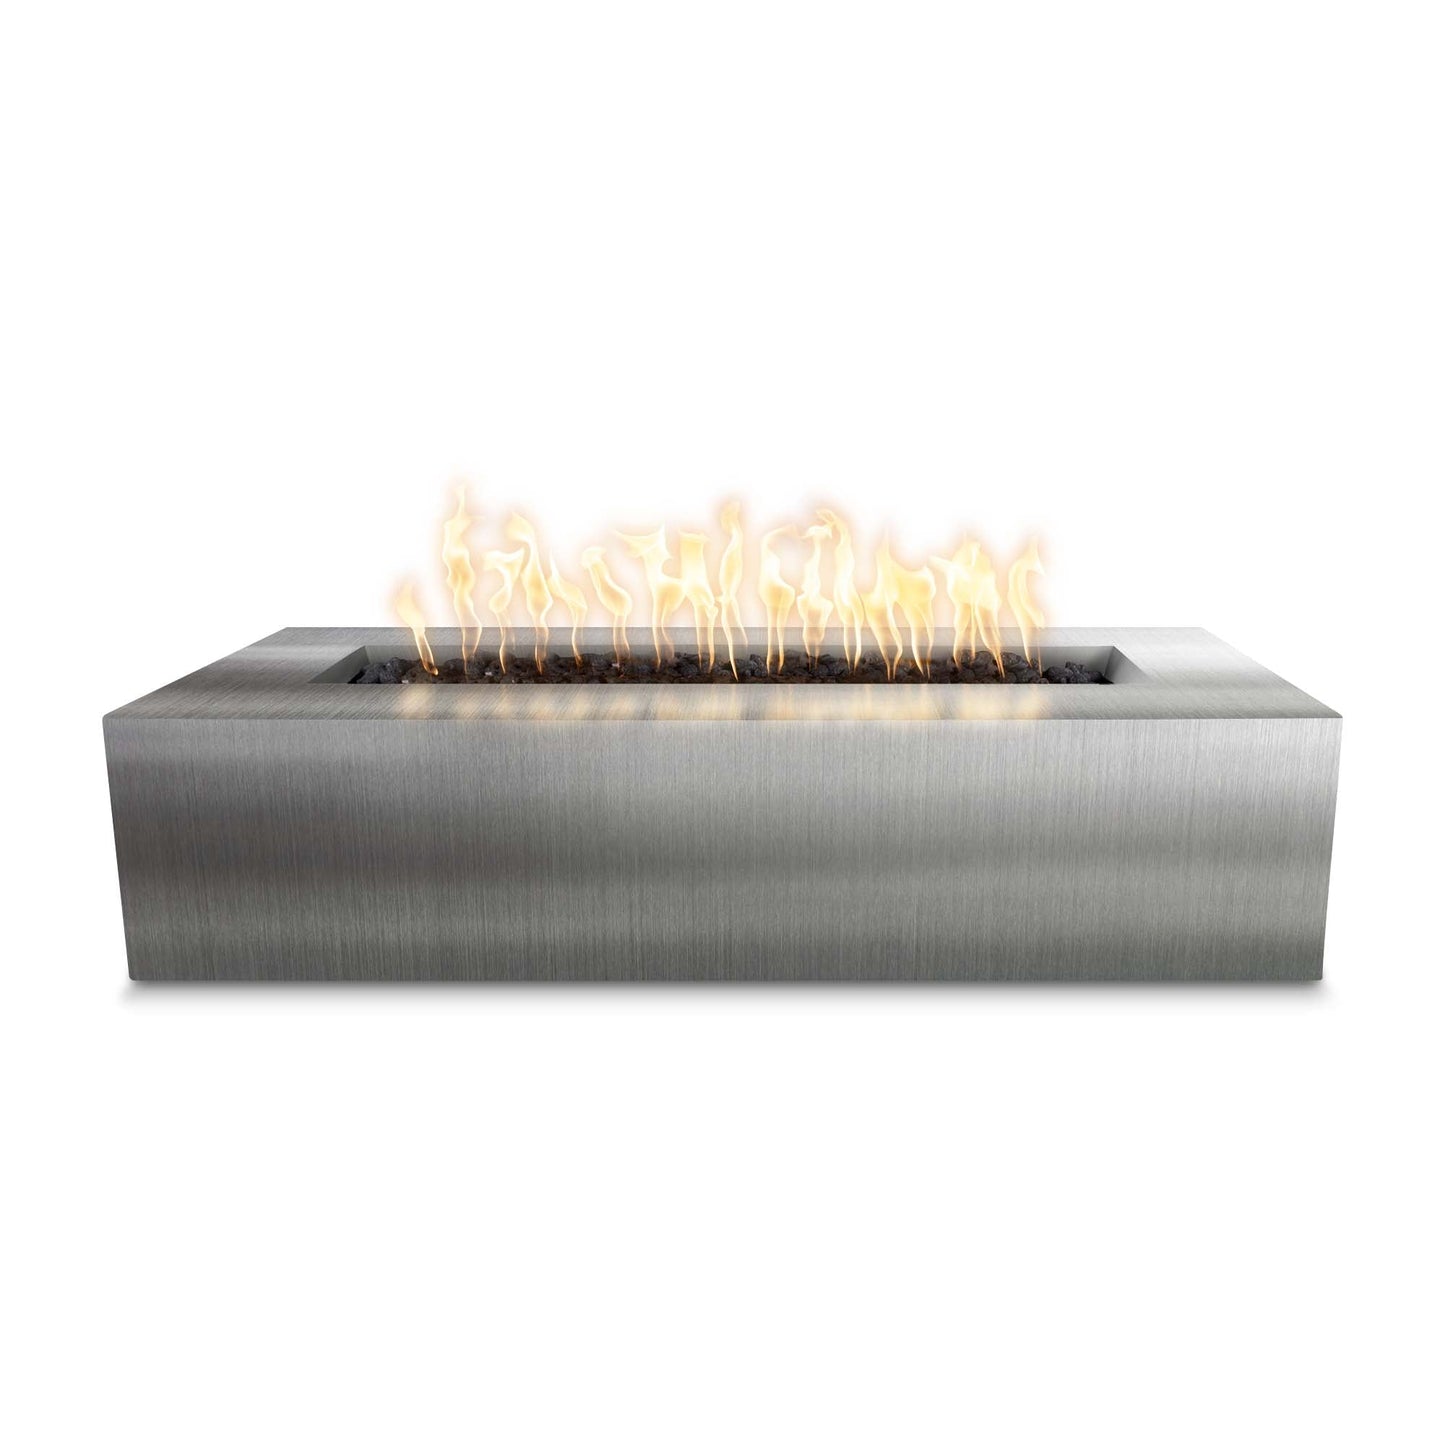 The Outdoor Plus Rectangular Regal 54" Hammered Copper Natural Gas Fire Pit with Match Lit Ignition